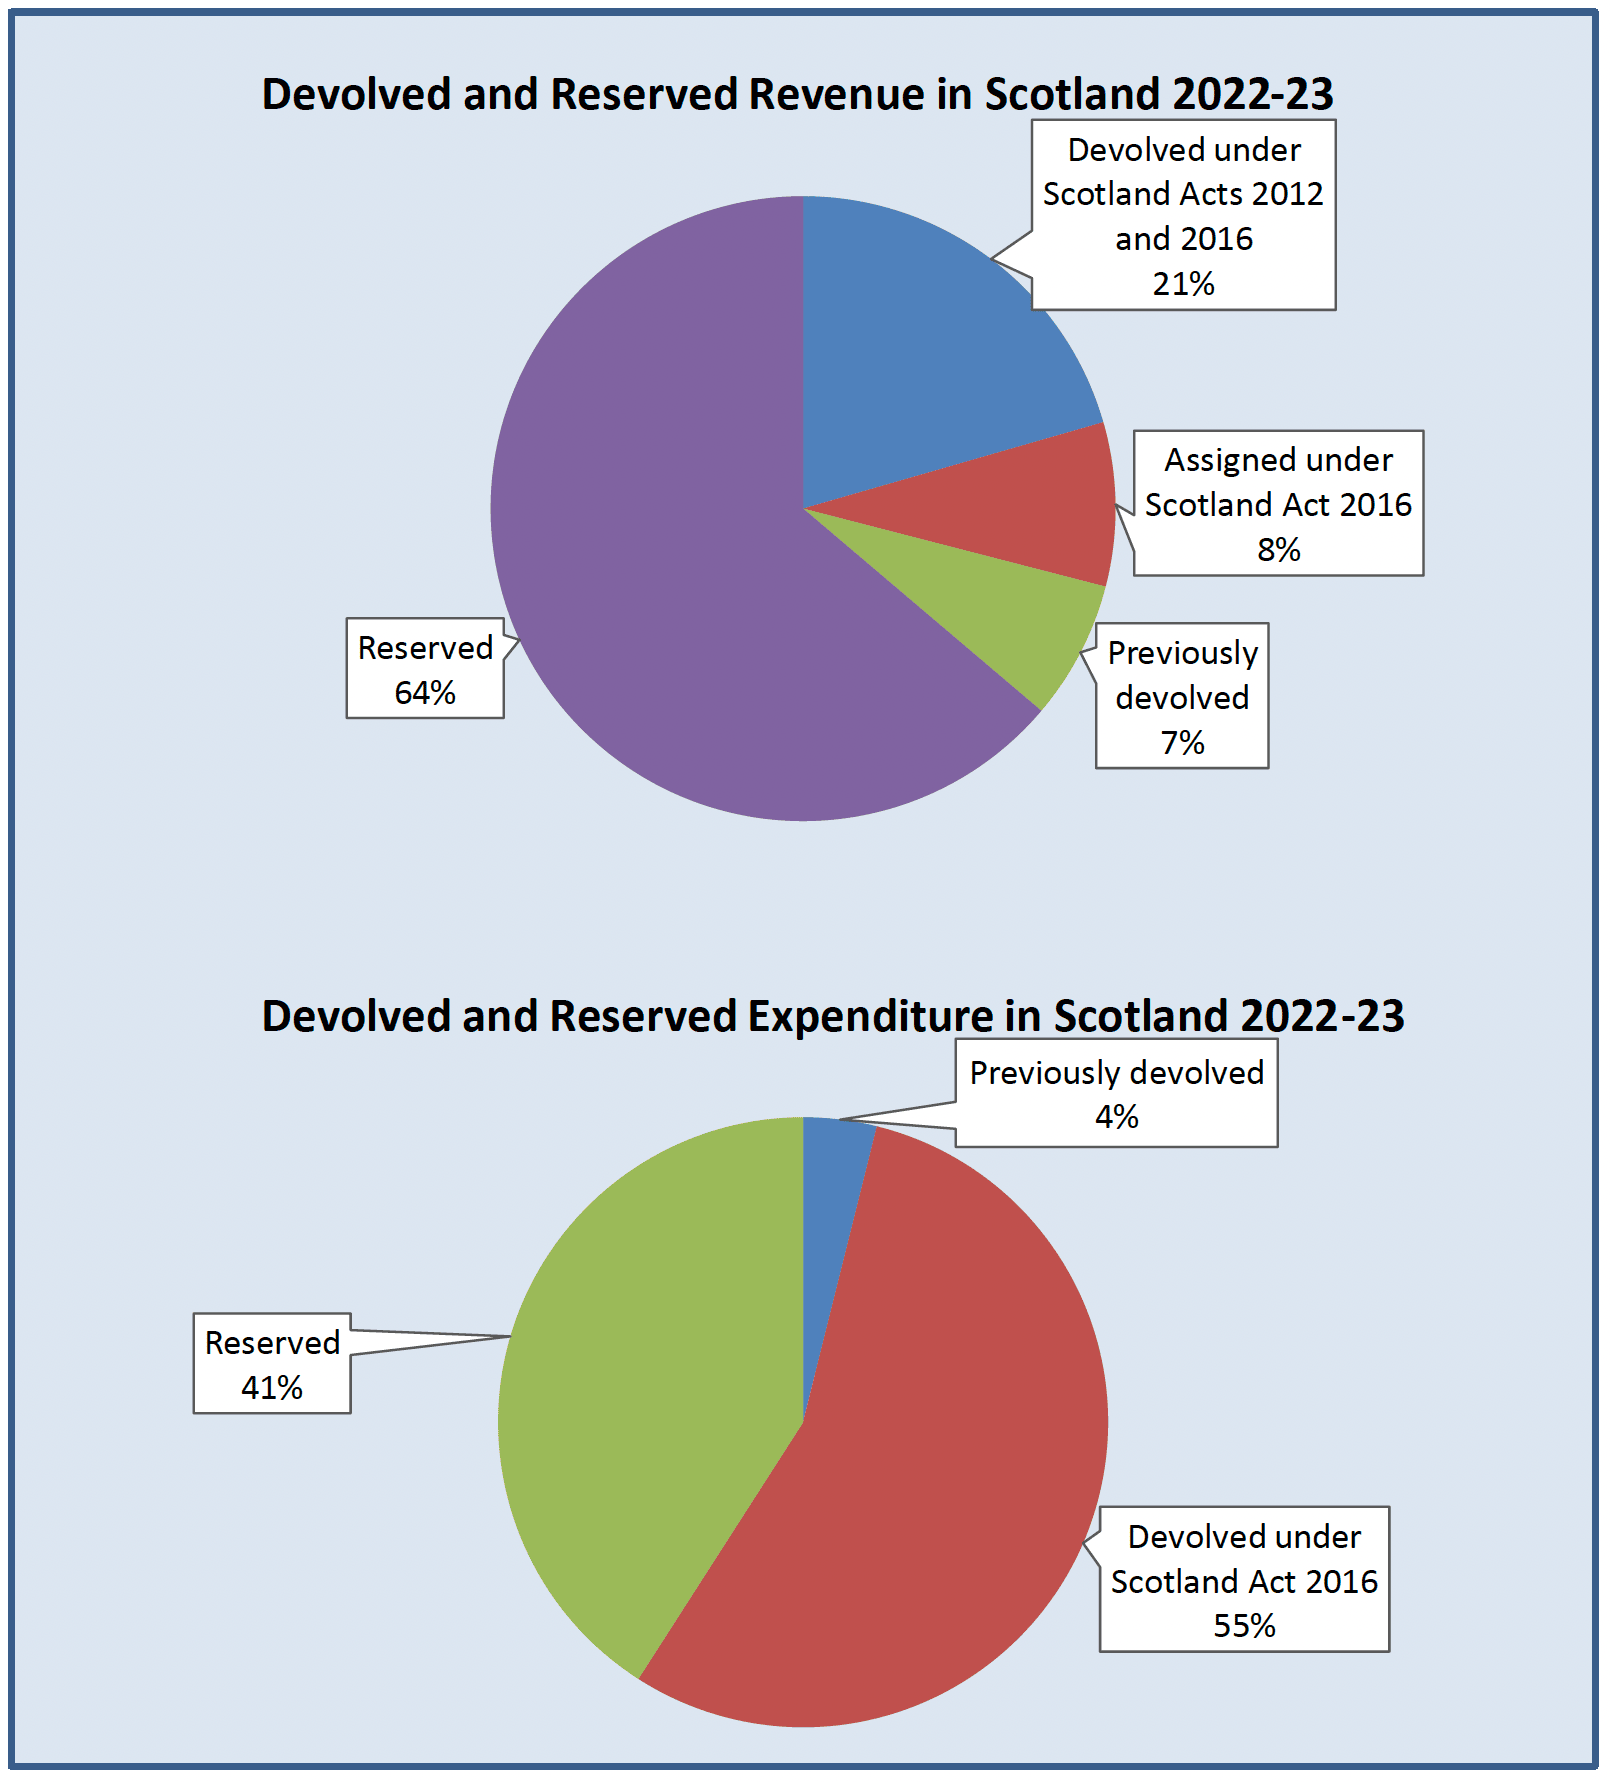 A breakdown of how much revenue is reserved. In 2022-23, 64% of revenue is reserved; 28% is devolved or due to be devolved; and 8% is due to be assigned to the Scottish Government. A breakdown of how much expenditure is reserved. In 2022-23, 41% of expenditure is reserved; while 59% is now devolved or due to be devolved, with the majority of this devolved following Scotland Act 2016.